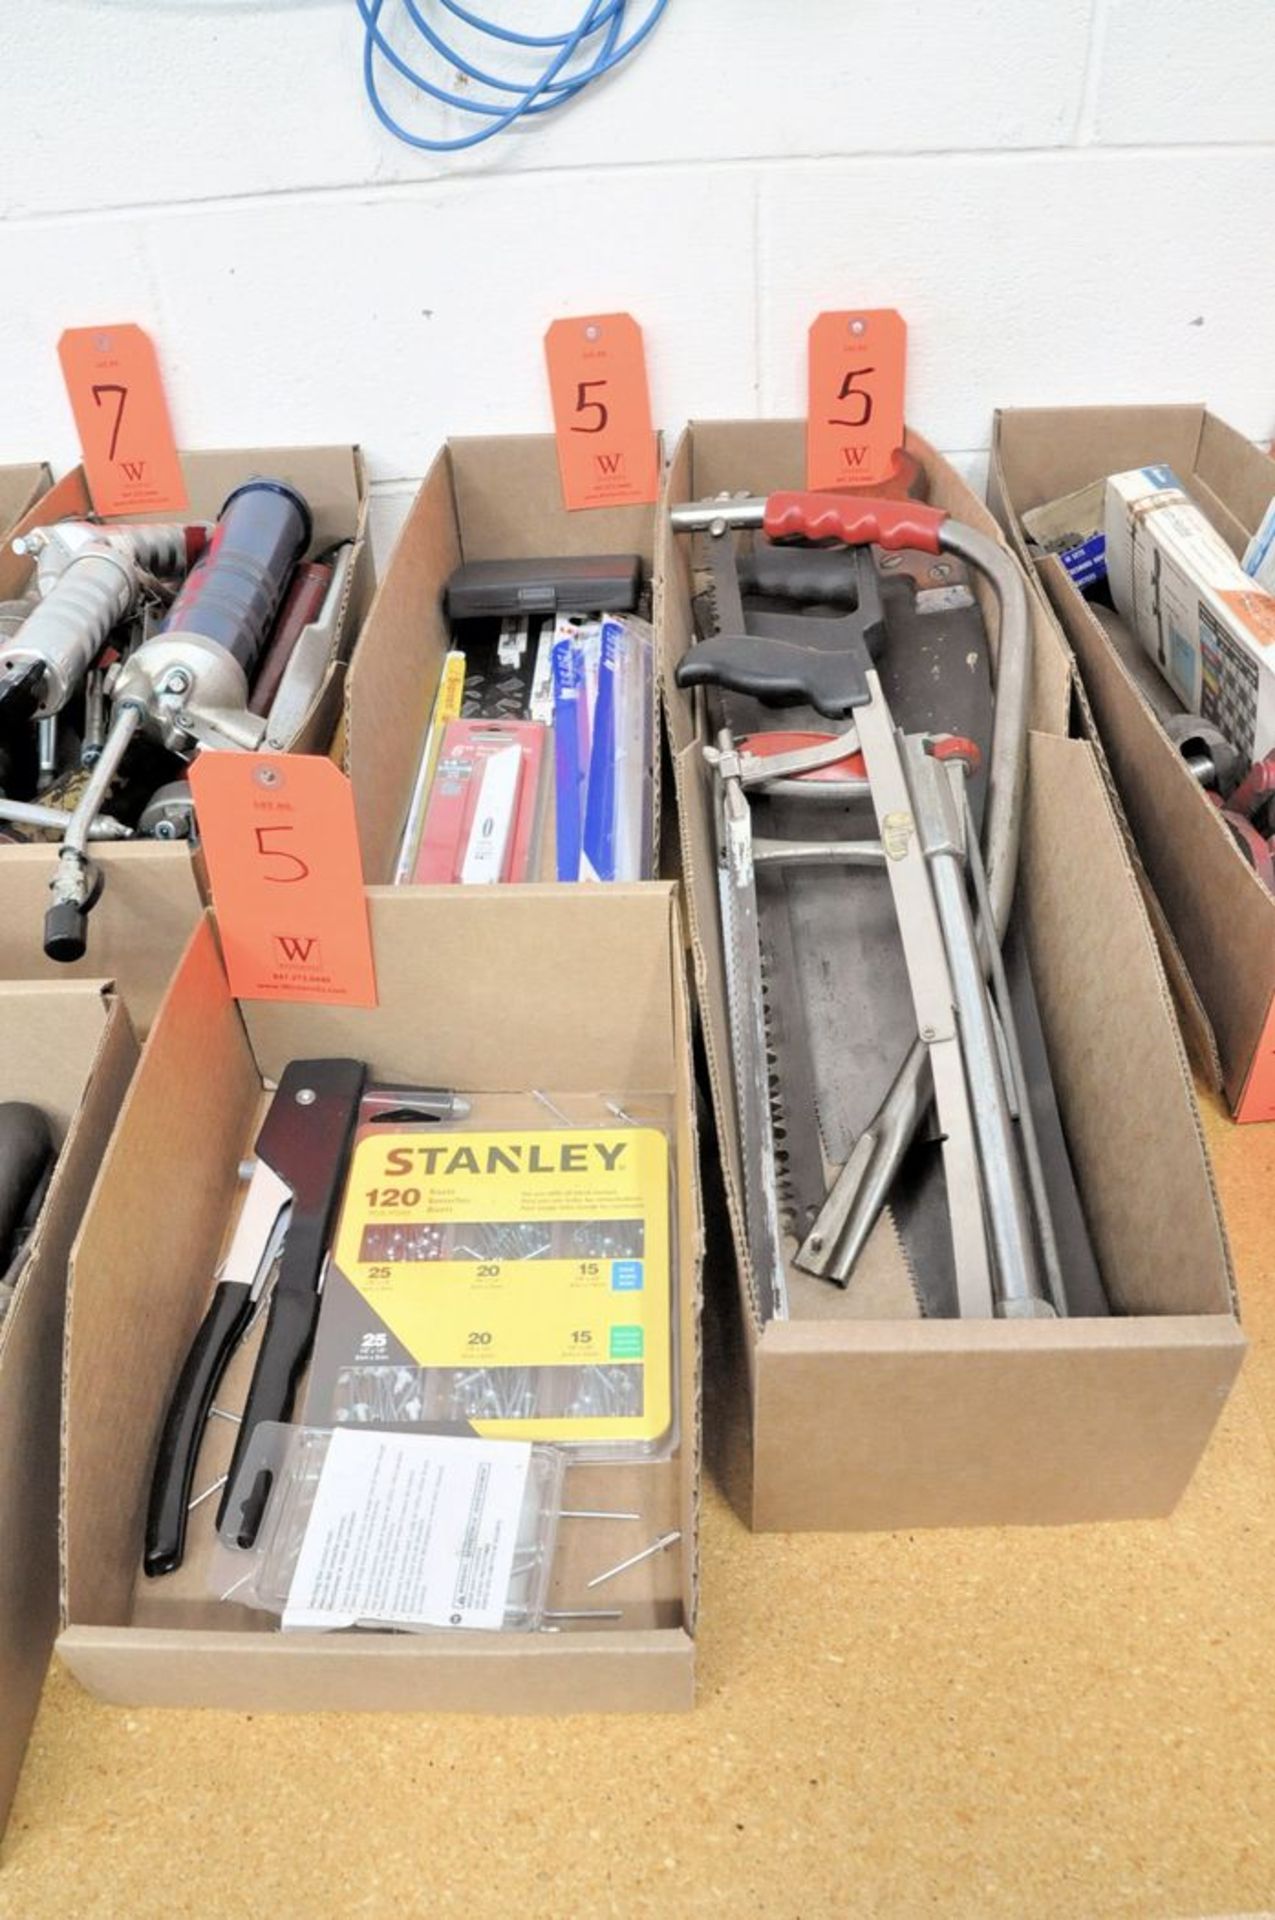 Lot - Hacksaws, Saw Blades and Rivet Tool in (3) Boxes